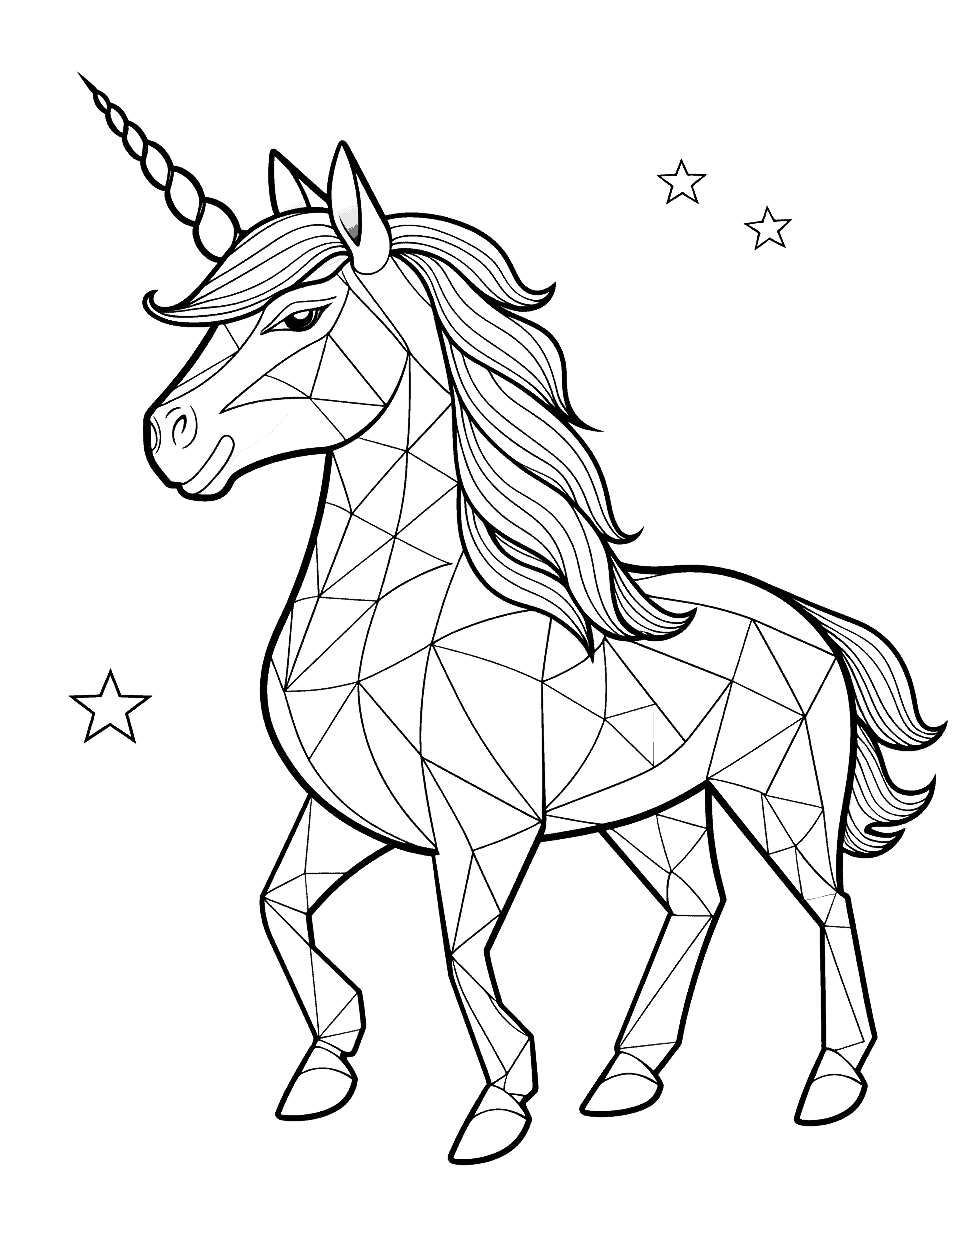 Unicorn and Origami Coloring Page - A unicorn with origami-style folded paper patterns for an interesting geometric coloring challenge.